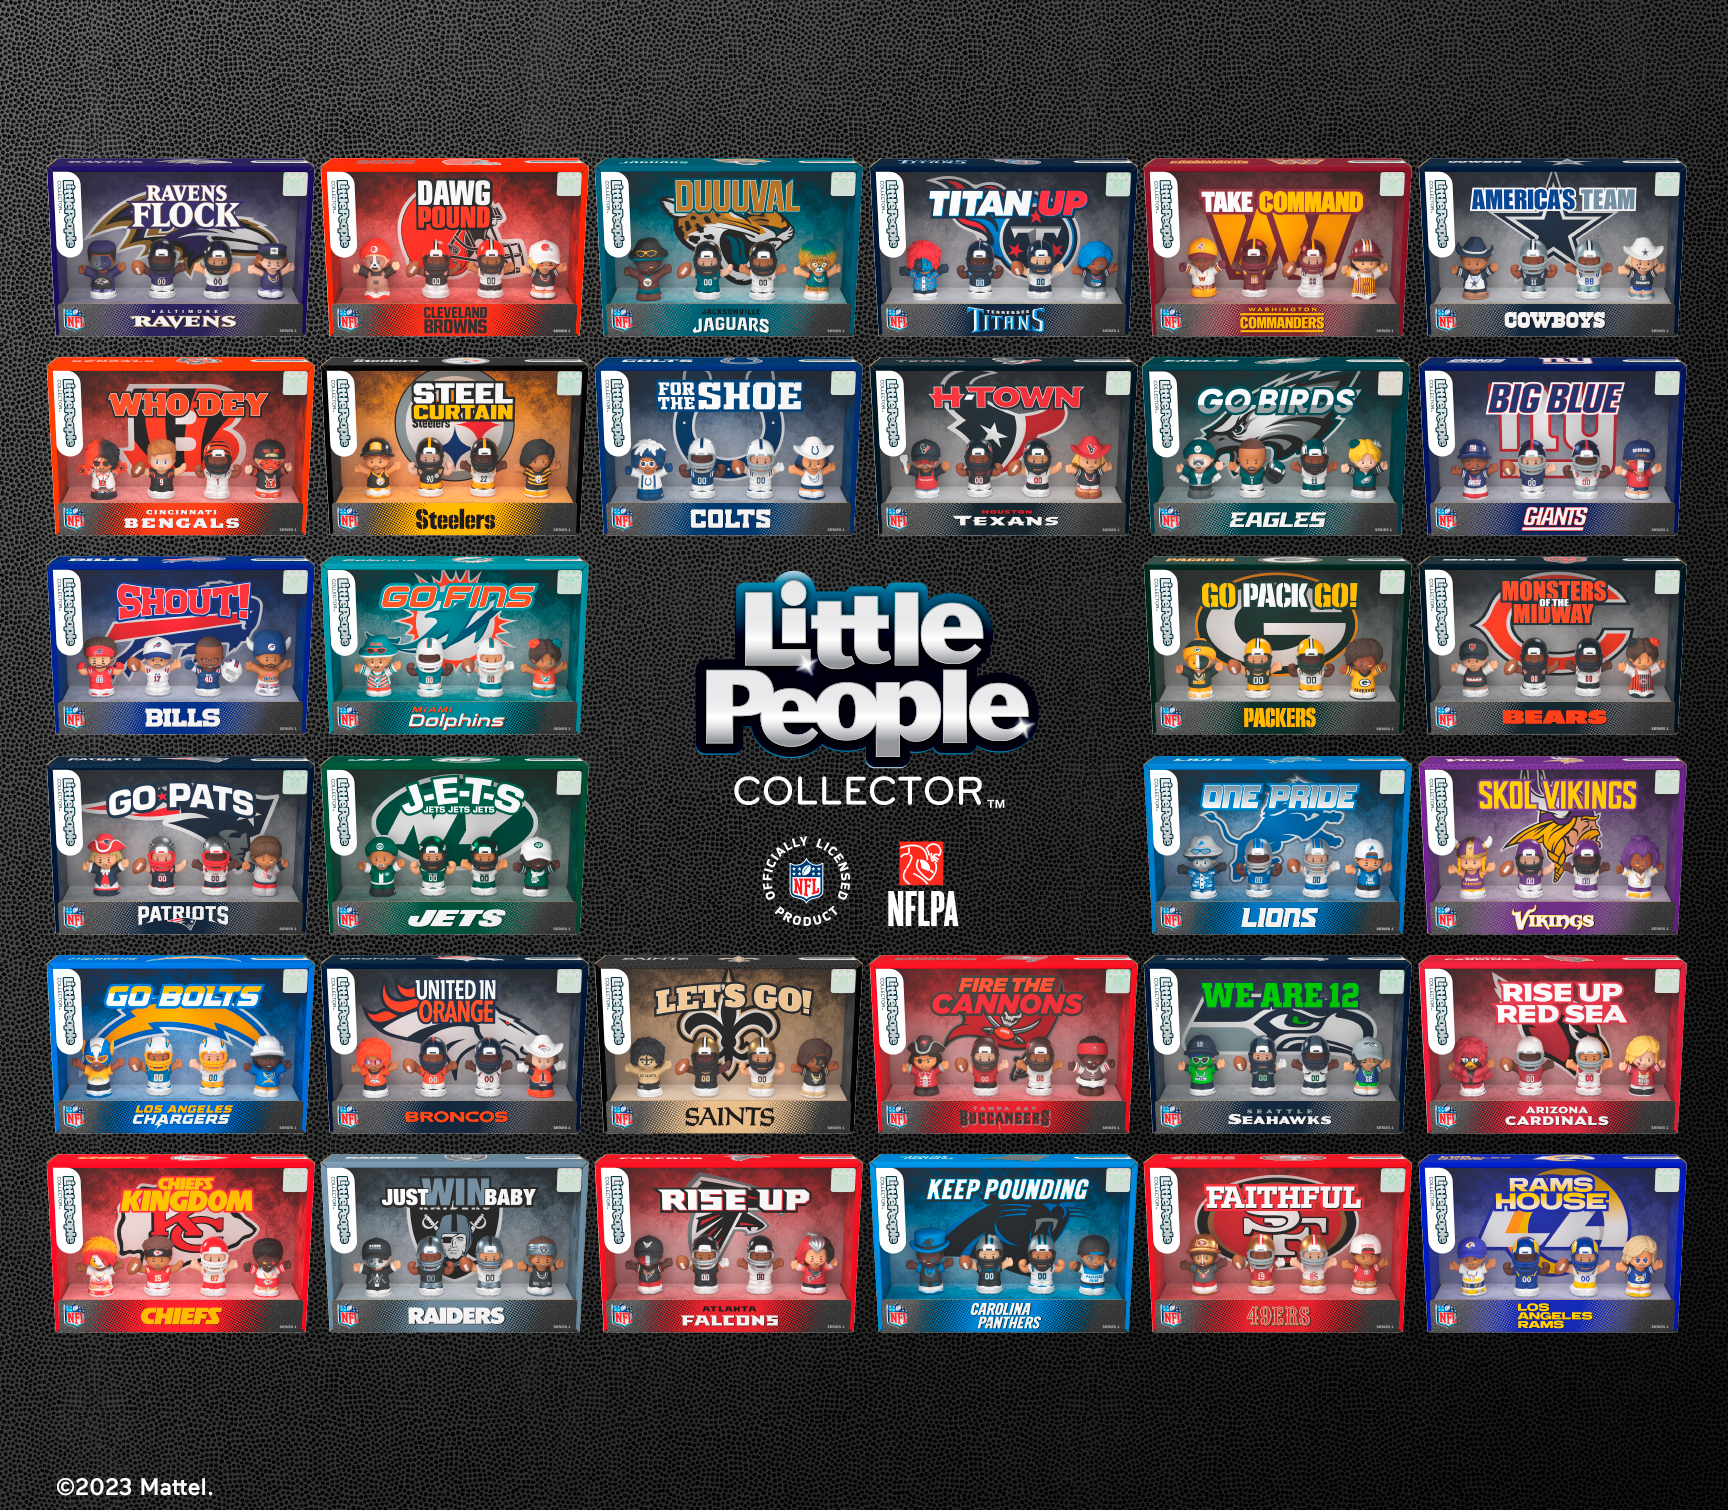 Fisher-Price® Celebrates Football Fandom in a Big Way With the New Little People Collector™ NFL Series Featuring All 32 NFL Teams Business Wire